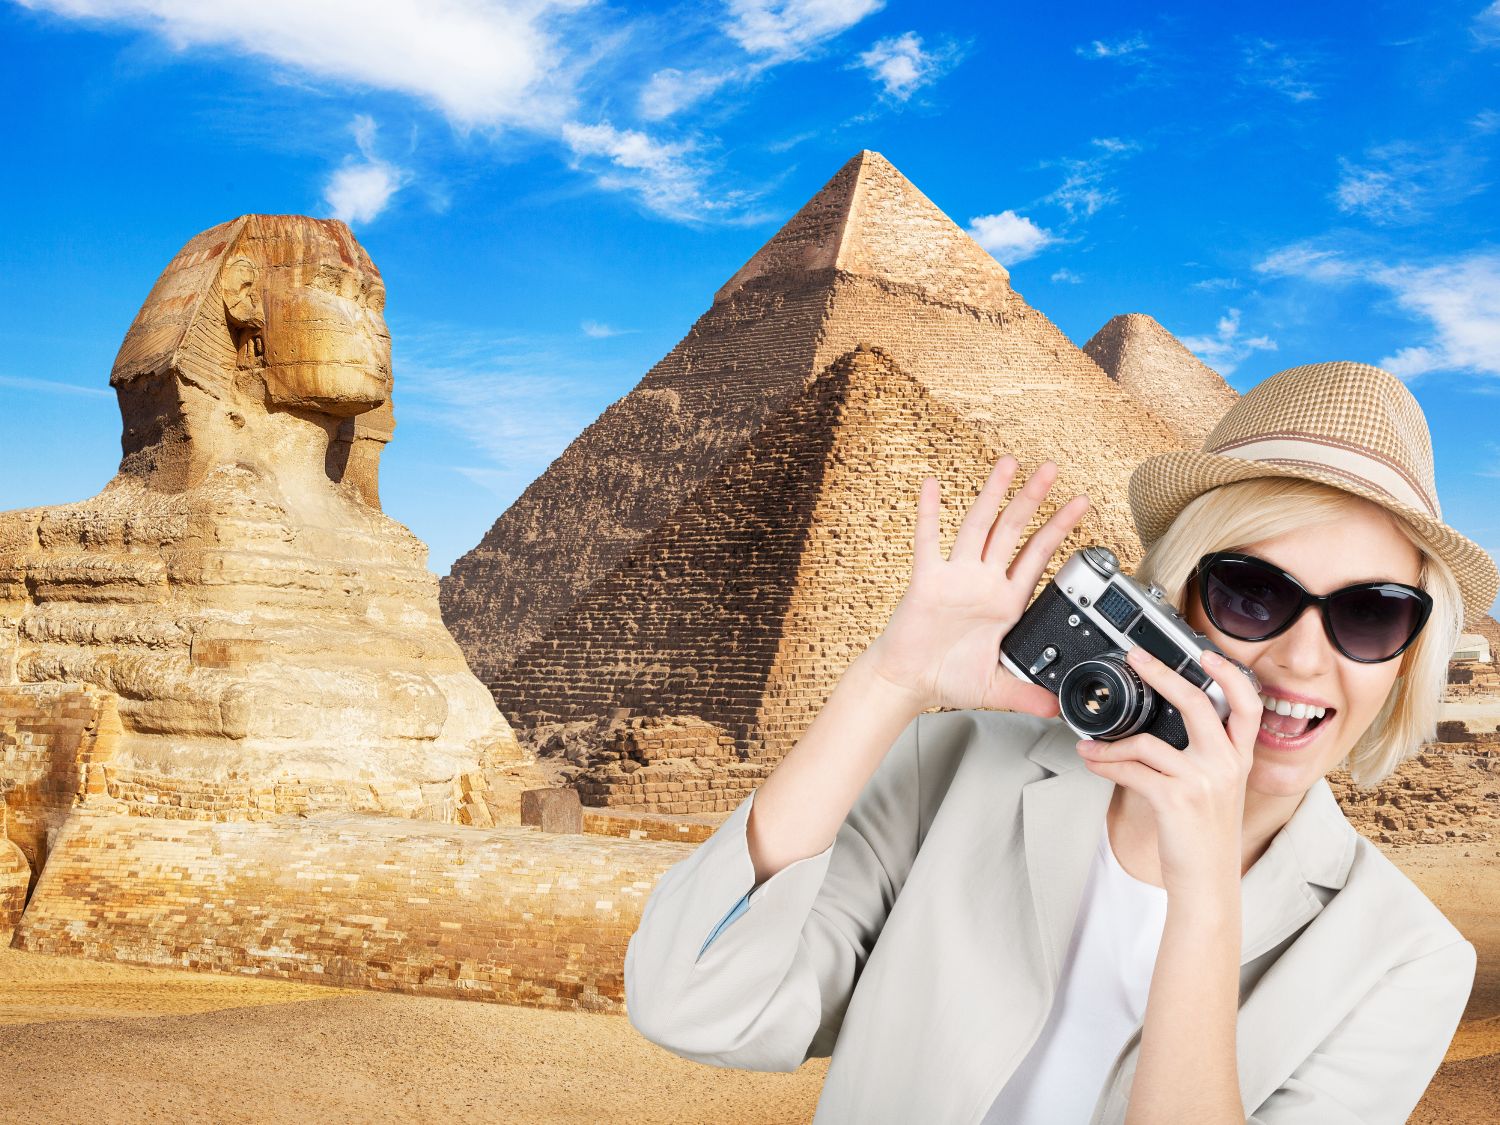 The 6 Best Egypt Tours For Unforgettable Adventures That Are Achievable & Affordable